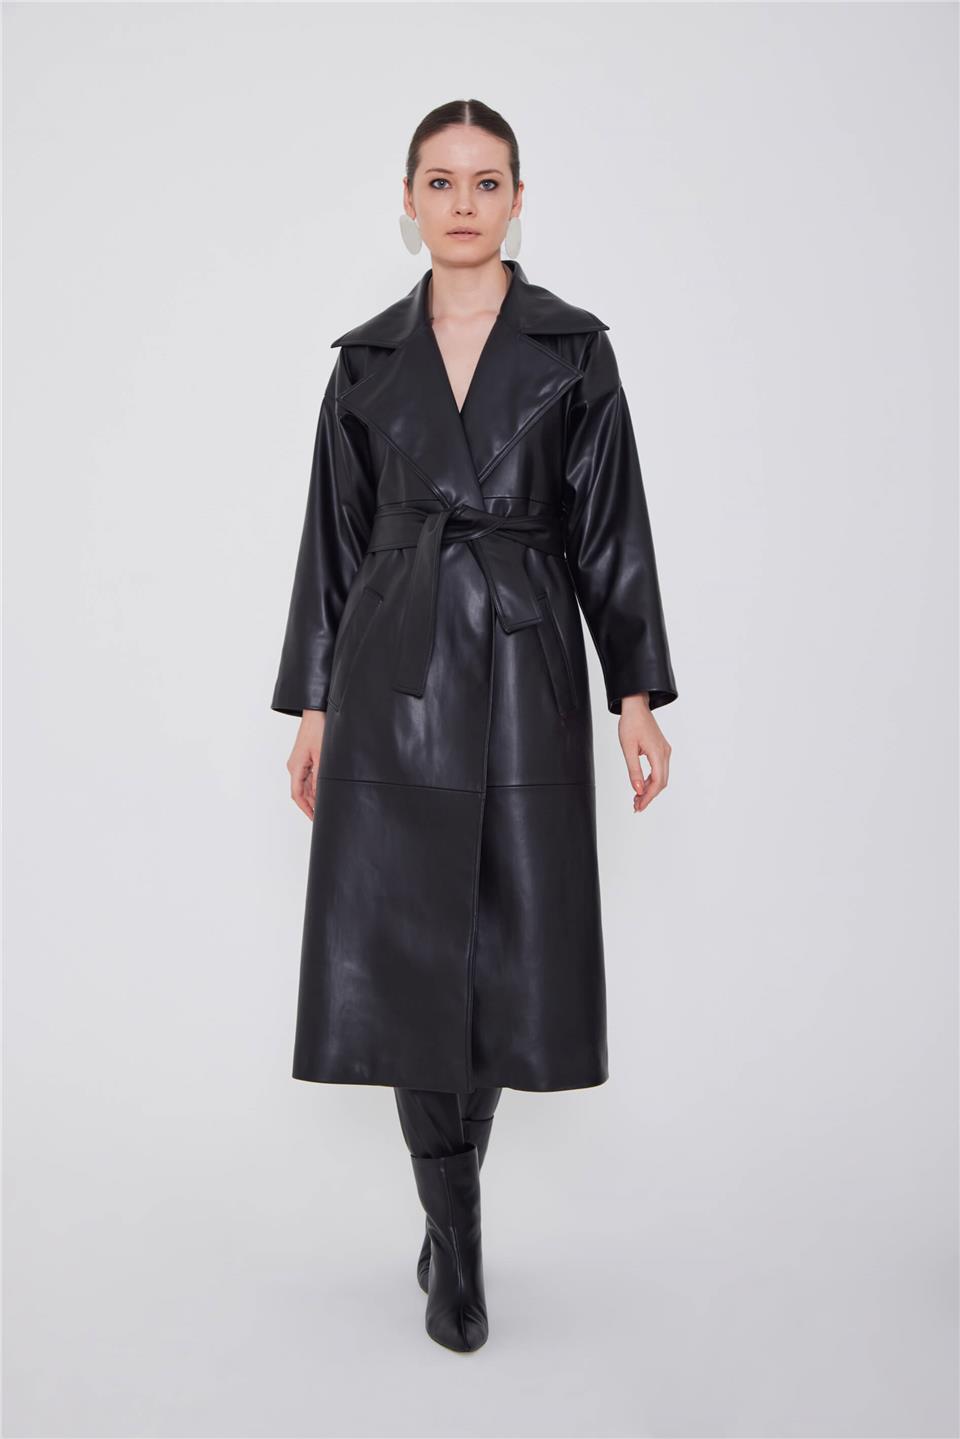 A model wears LFN10762 - Pu Leather Trenchcoat Deep Ink Black - Siyah, wholesale Trenchcoat of Lefon to display at Lonca